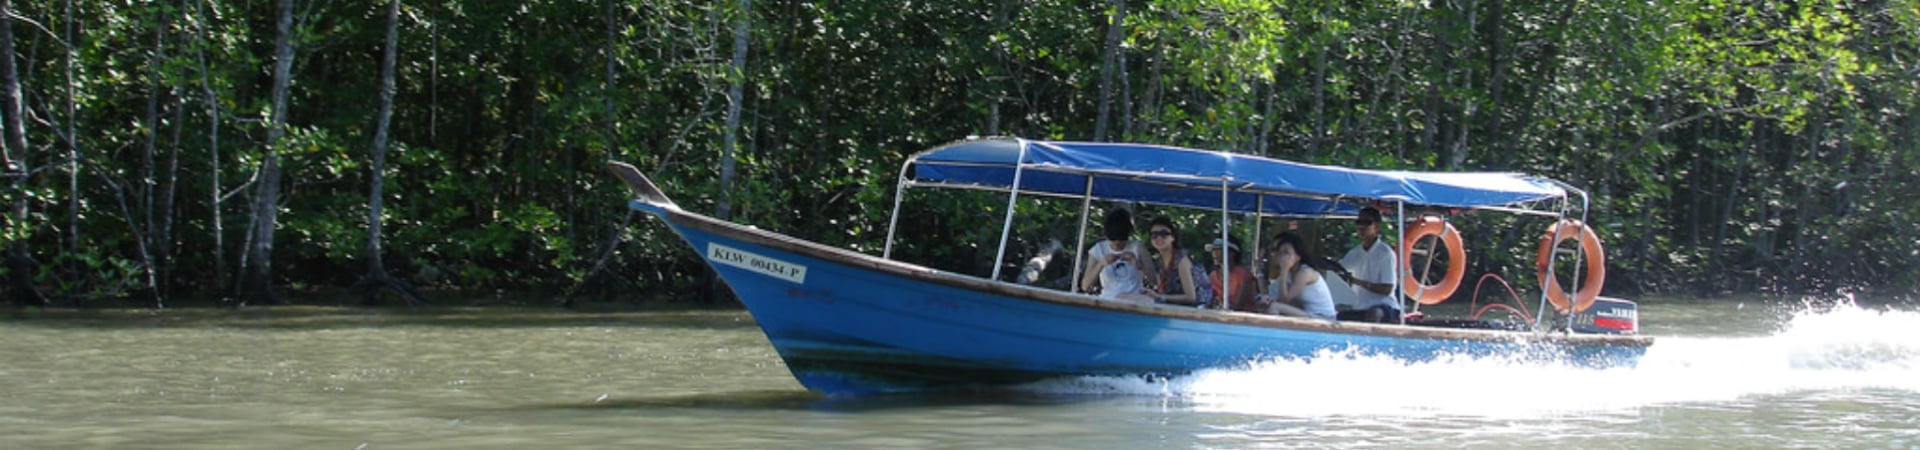 Image of Langkawi Mangrove Forest Boat Trip (Join in Tour)